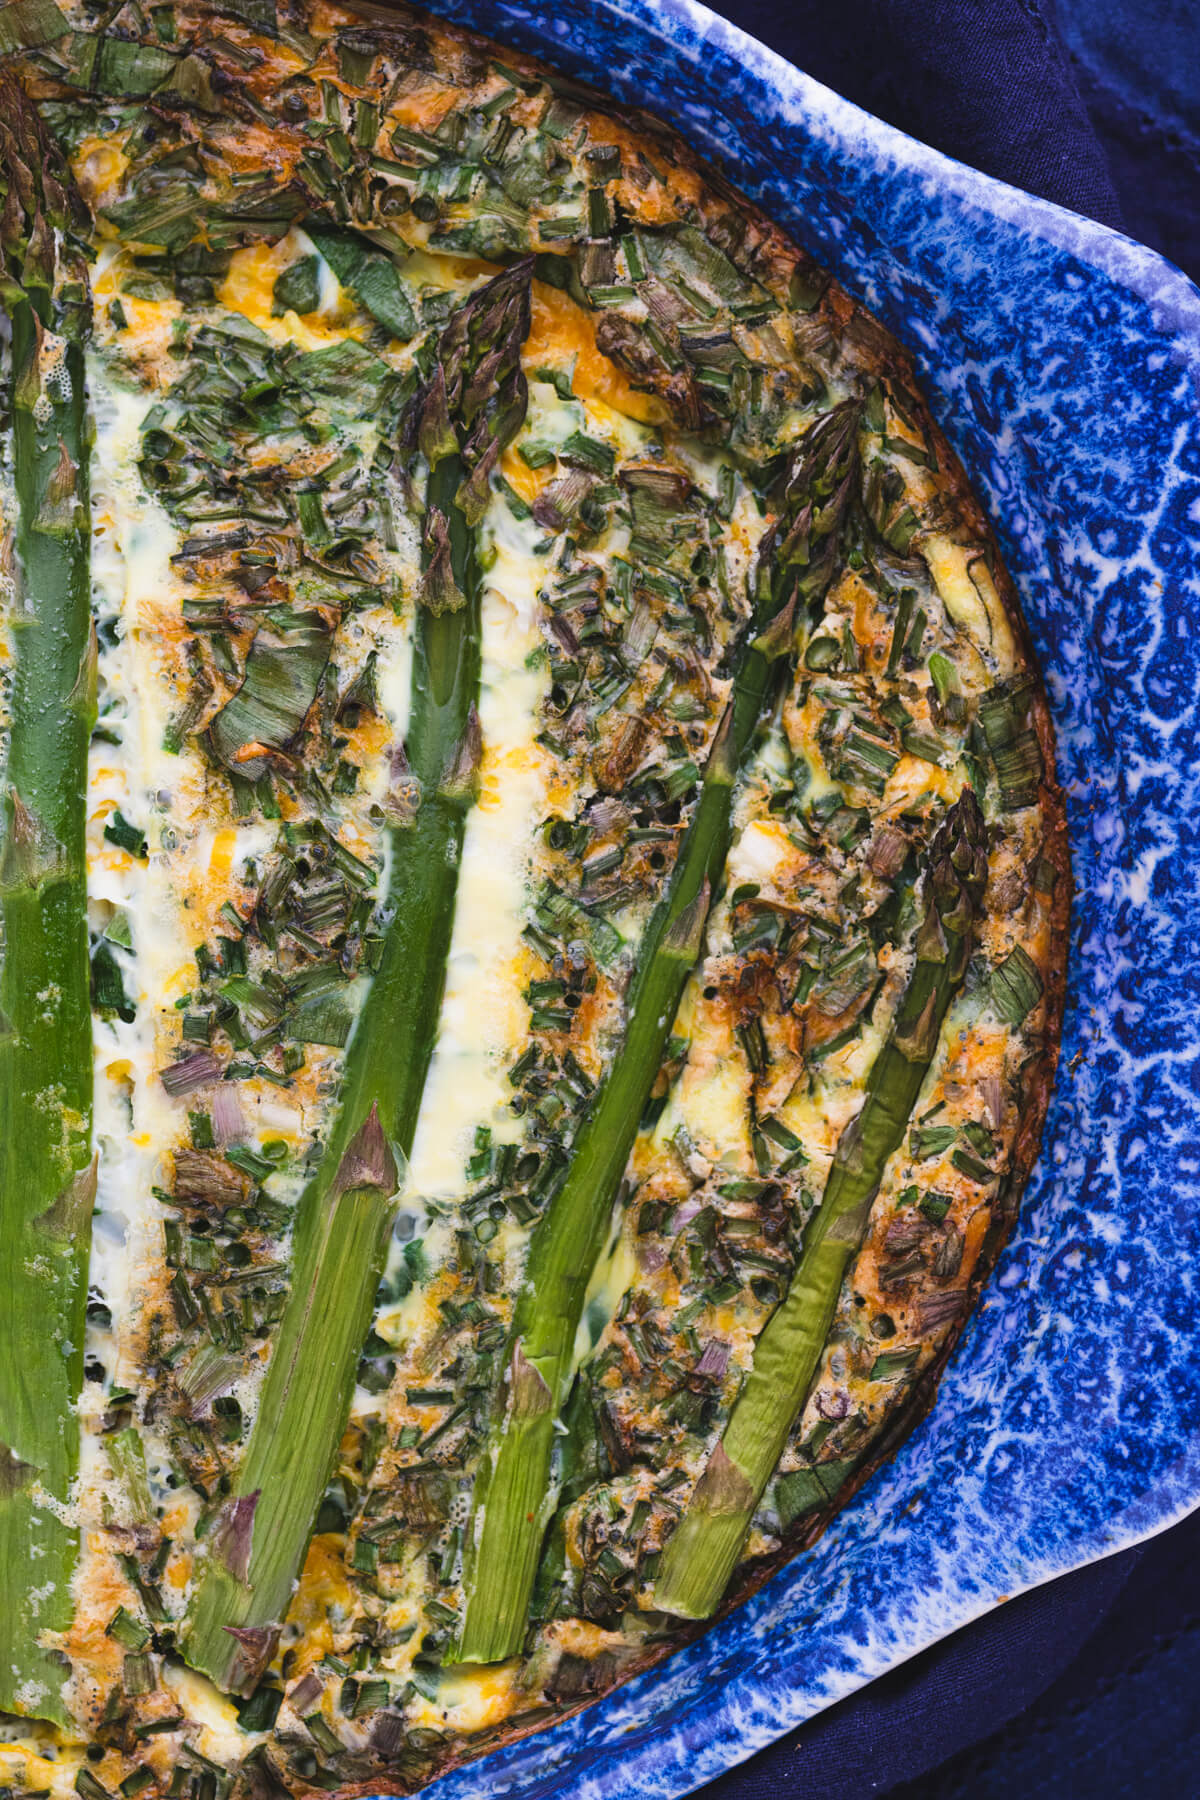 A baked Asparagus Quiche in a blue ceramic baking dish.